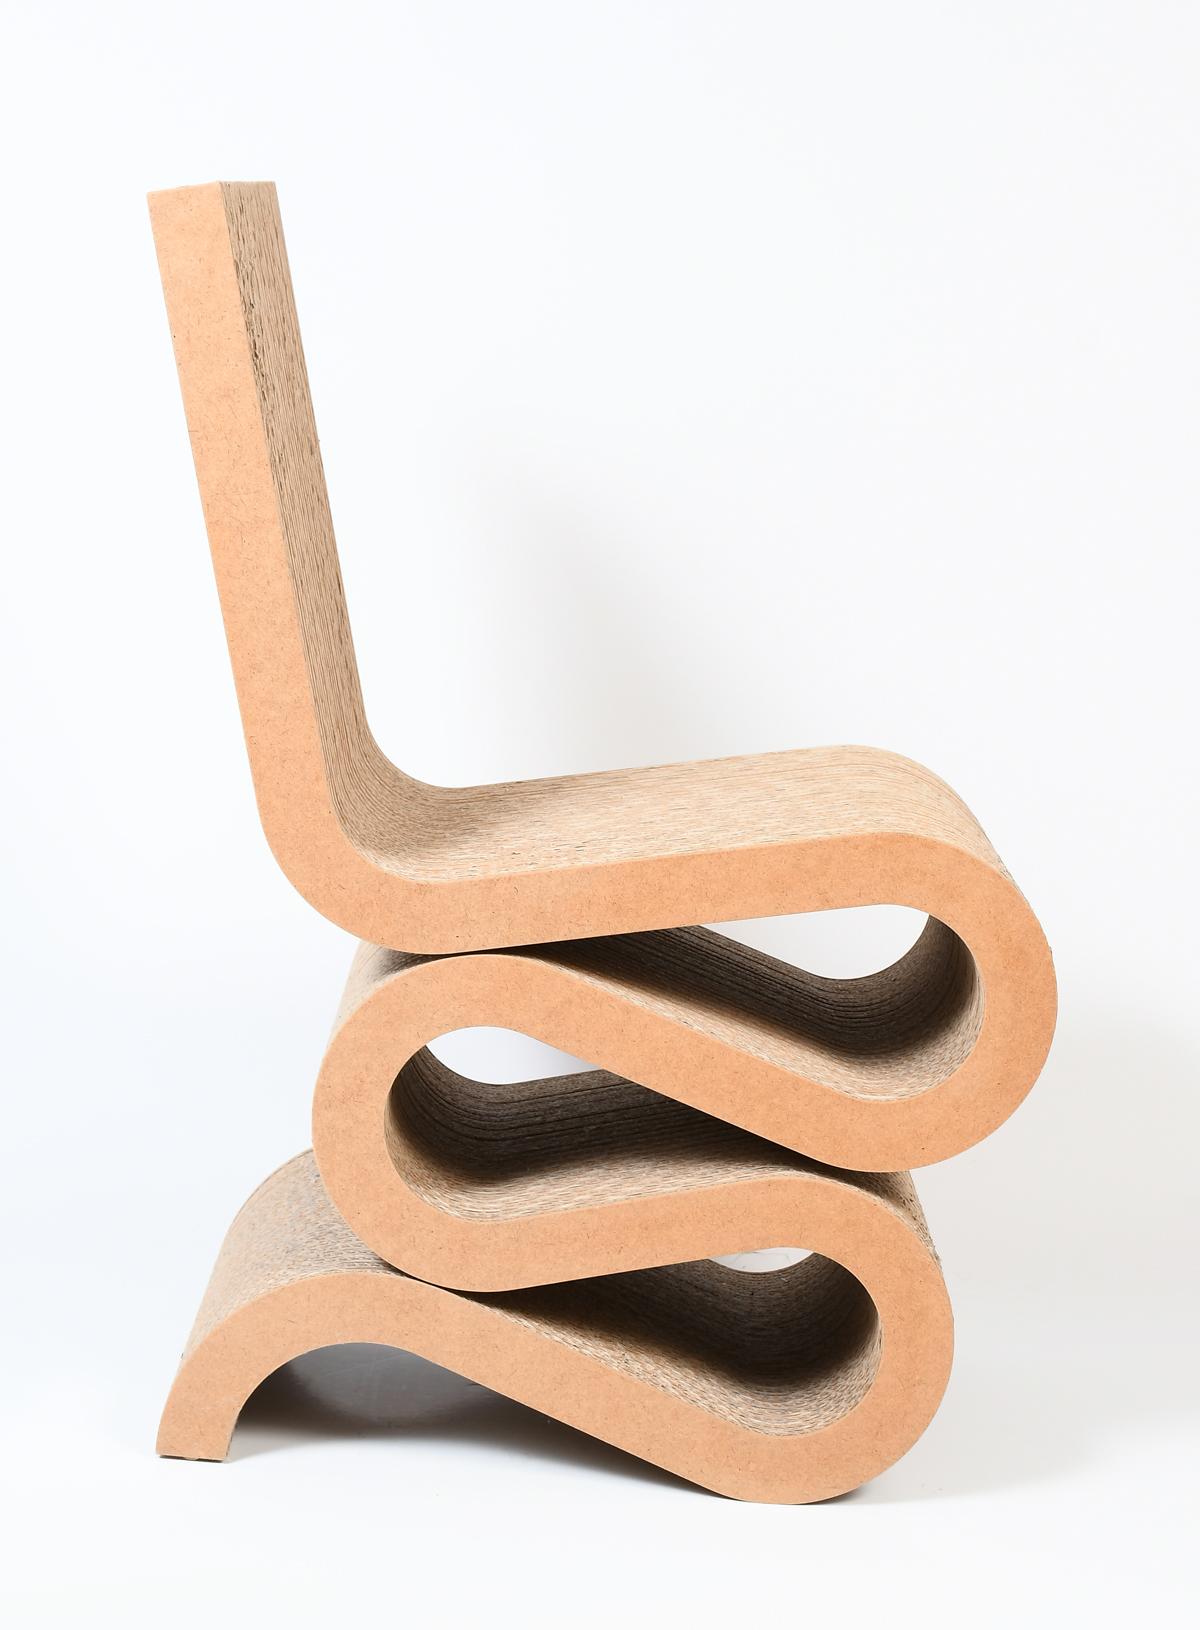 GEHRY WIGGLE CHAIR: Approximately